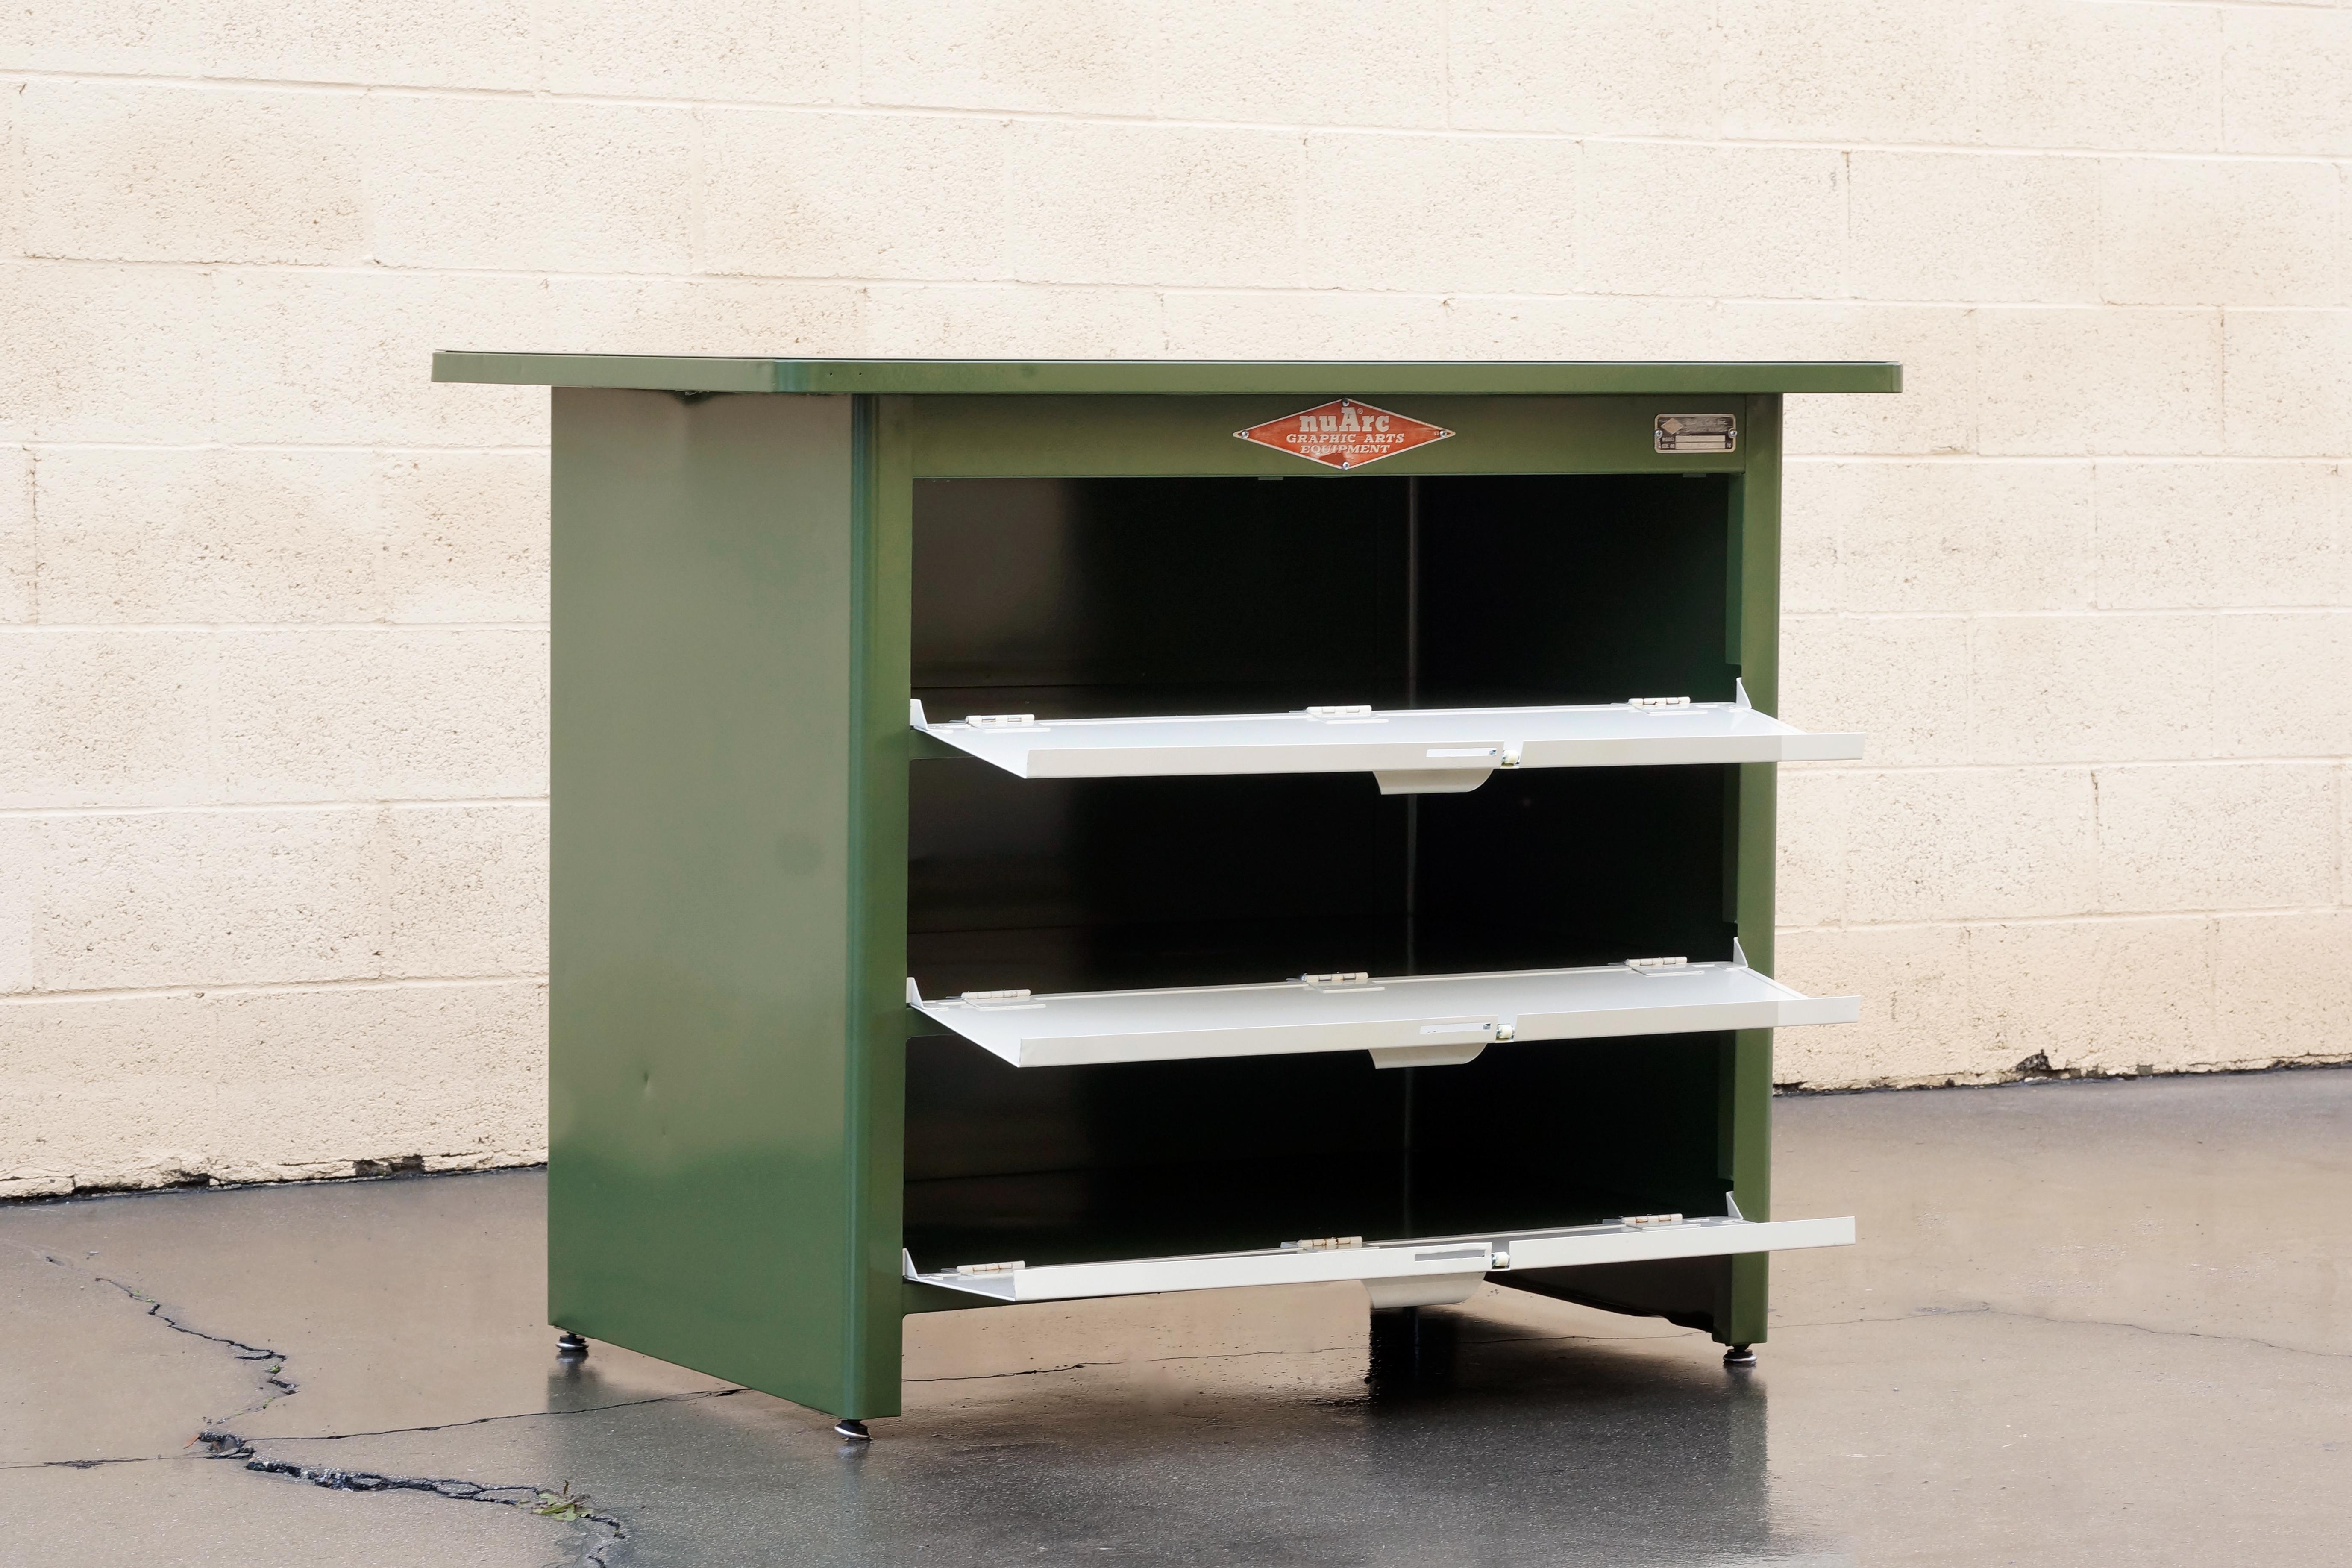 Excellent 1960s tool cabinet meets drafting table by Nuarc Graphic Arts Equipment. We refinished this beauty in two-tone Army Green (RAL6009) and Pearl. Features three doored-shelves and original labels. Looks great in a studio, office, workshop or